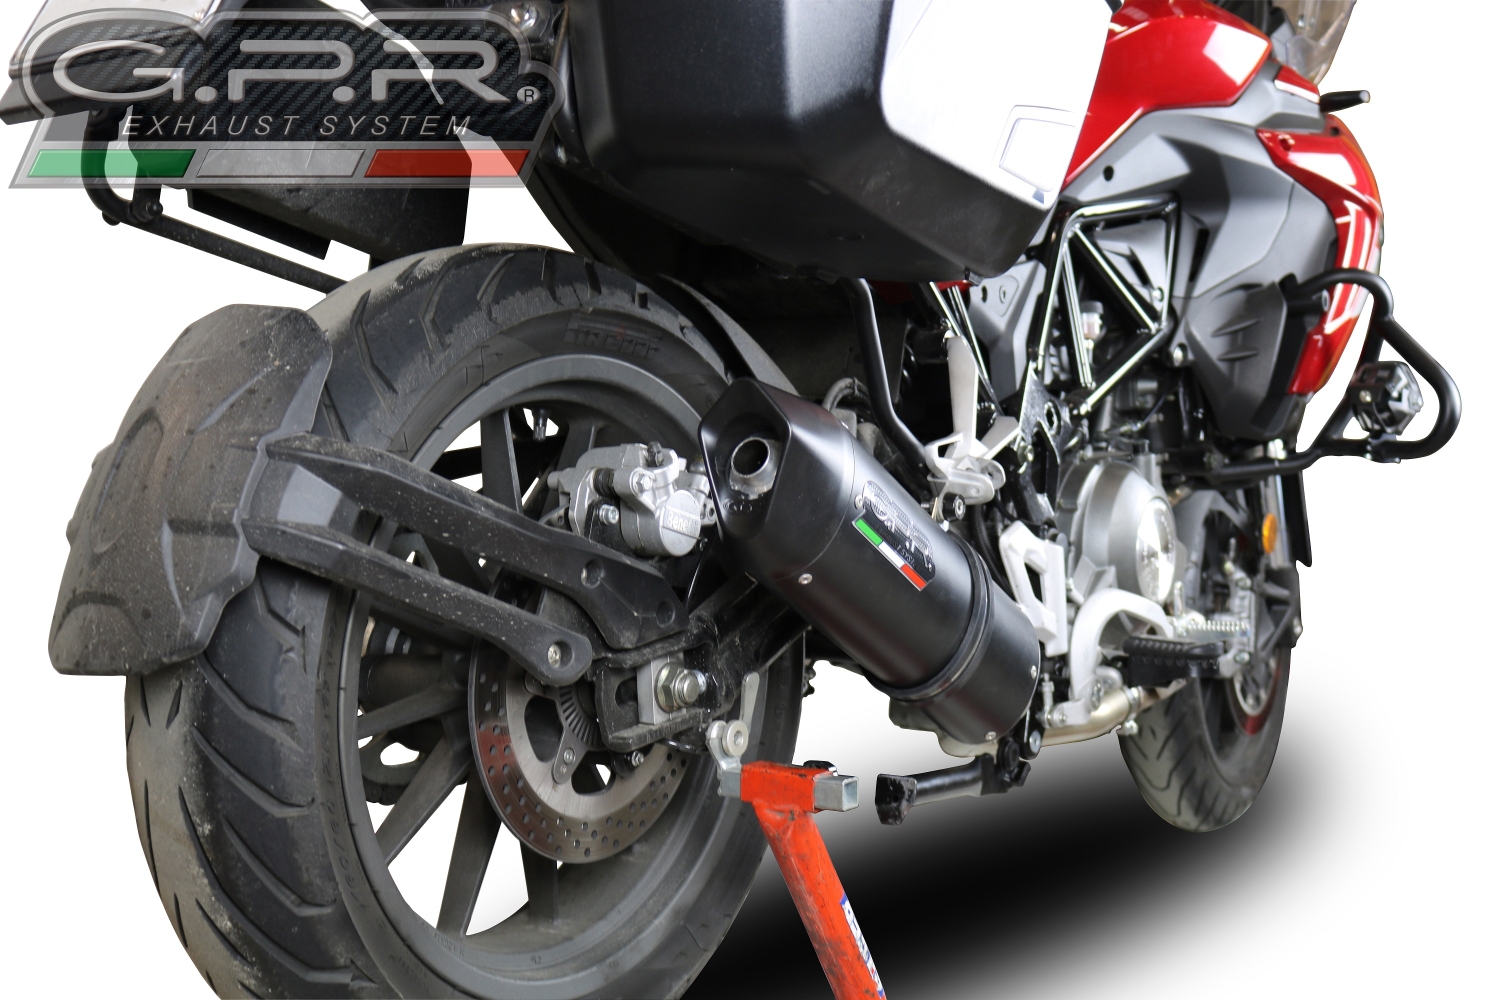 Exhaust system compatible with Benelli Trk 502 2017-2020, Furore Evo4 Nero, Homologated legal slip-on exhaust including removable db killer, link pipe and catalyst 